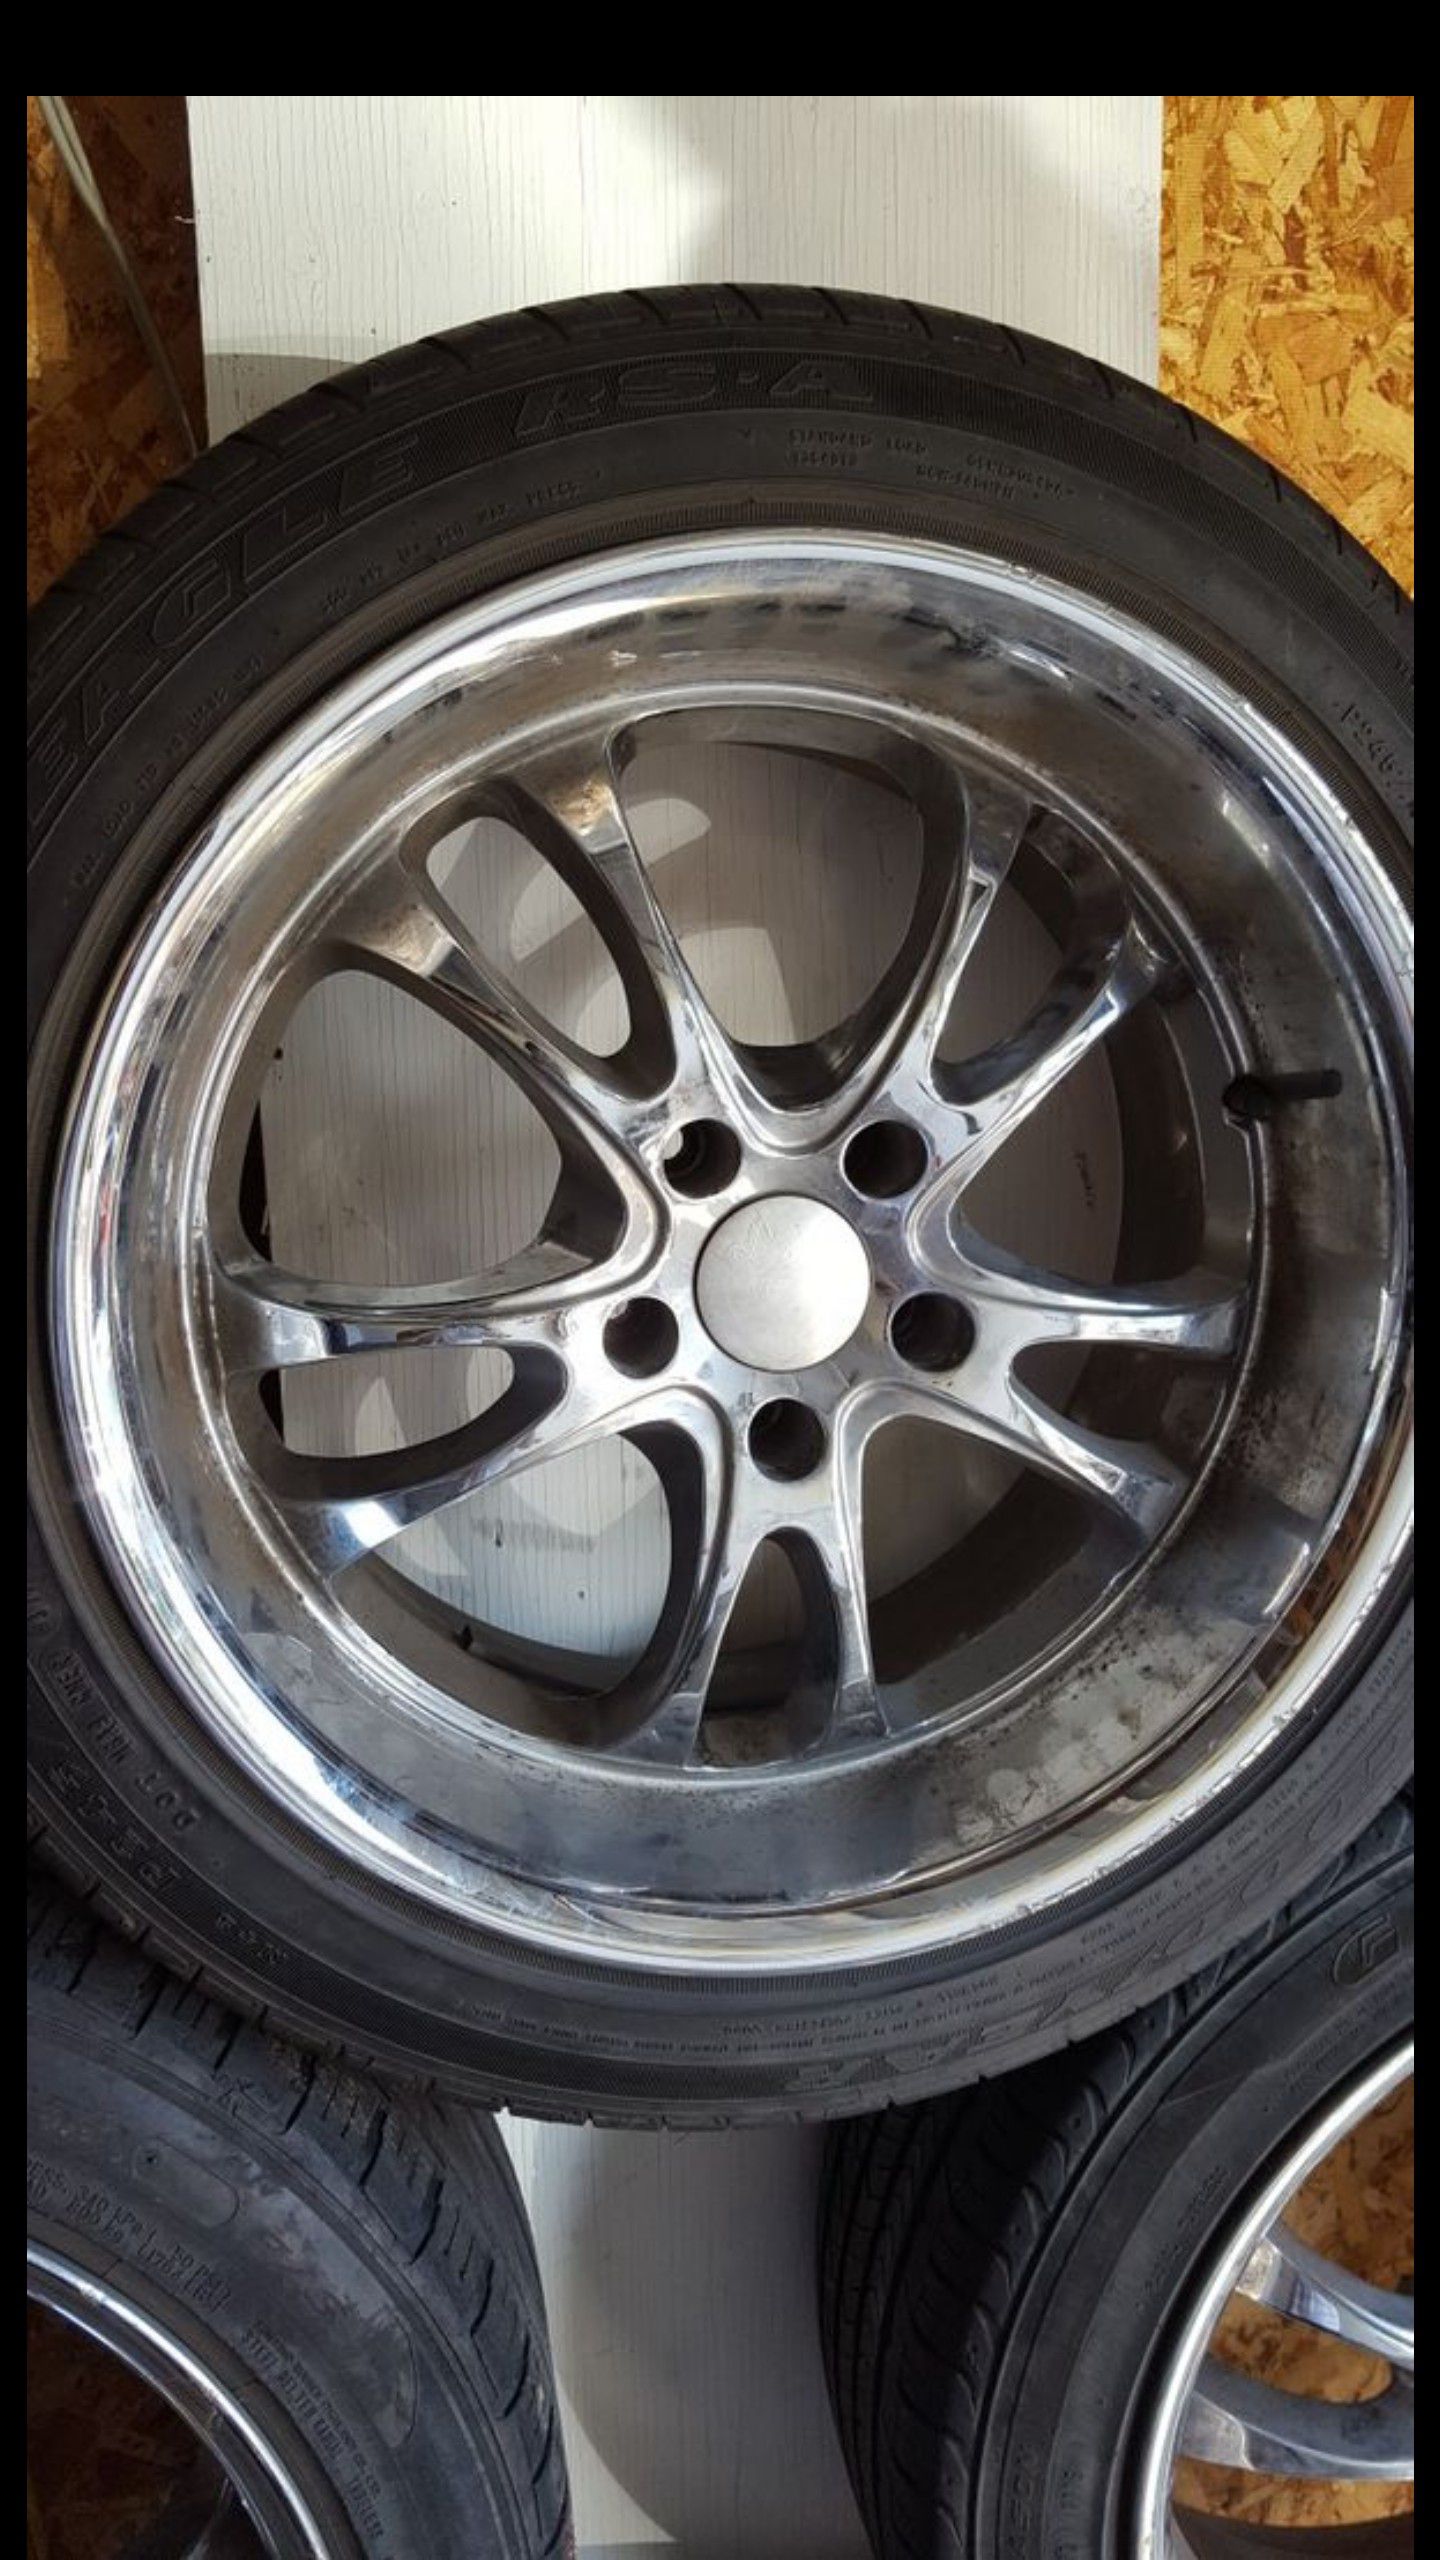 18" 5/114.3 for sale $150 or trade for boxing equipment